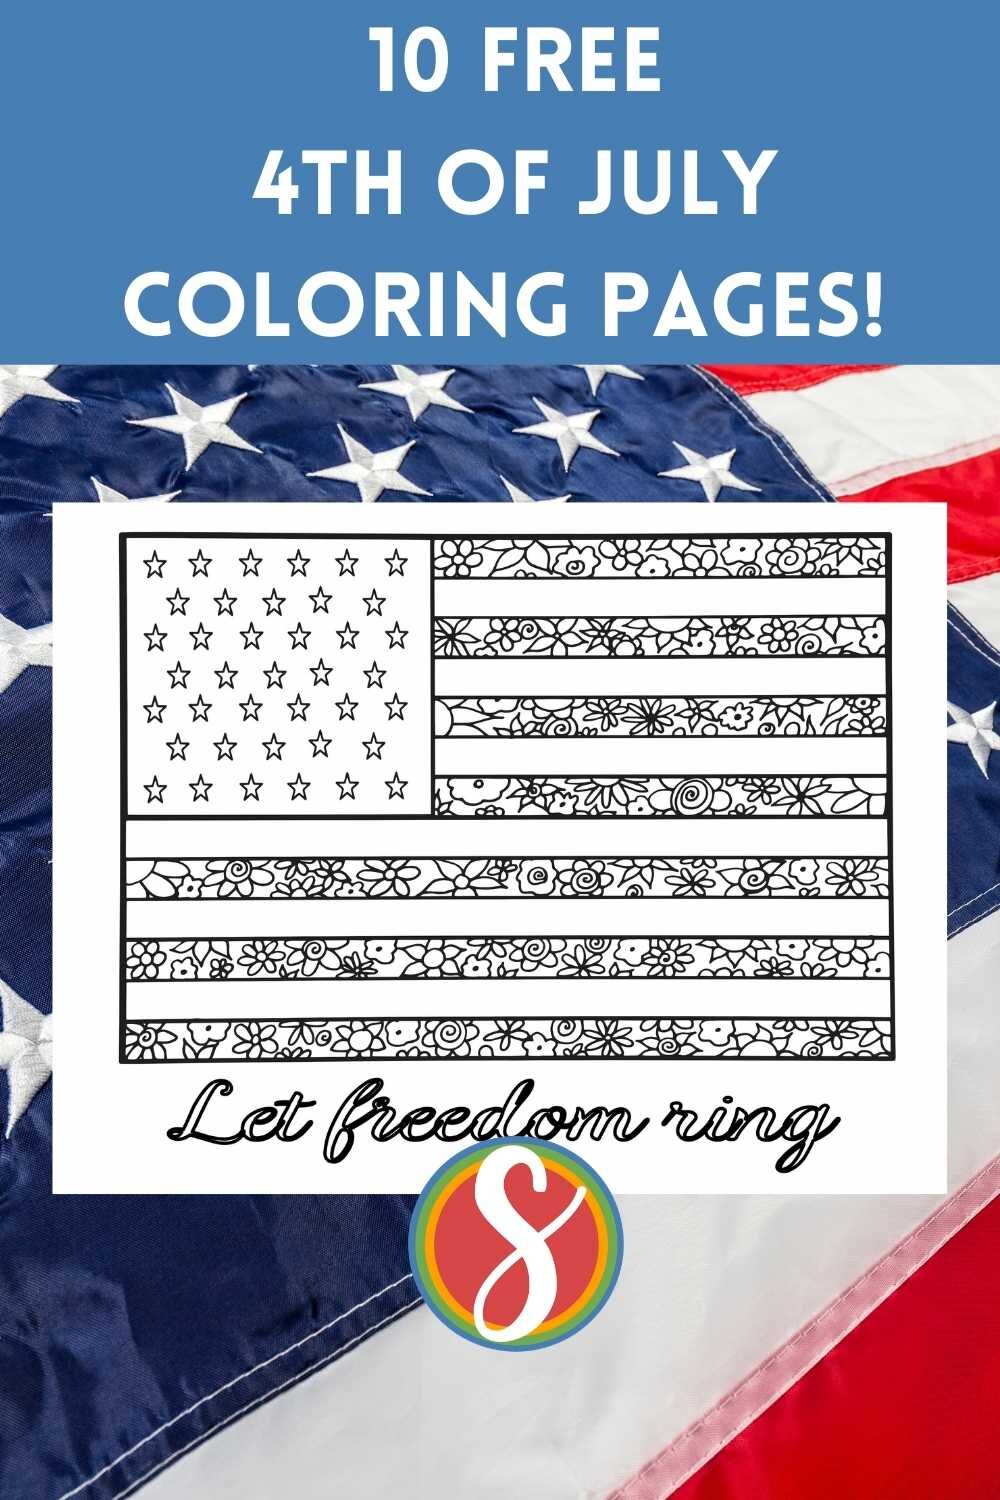 Free printable 4th of July coloring page from Stevie Doodles